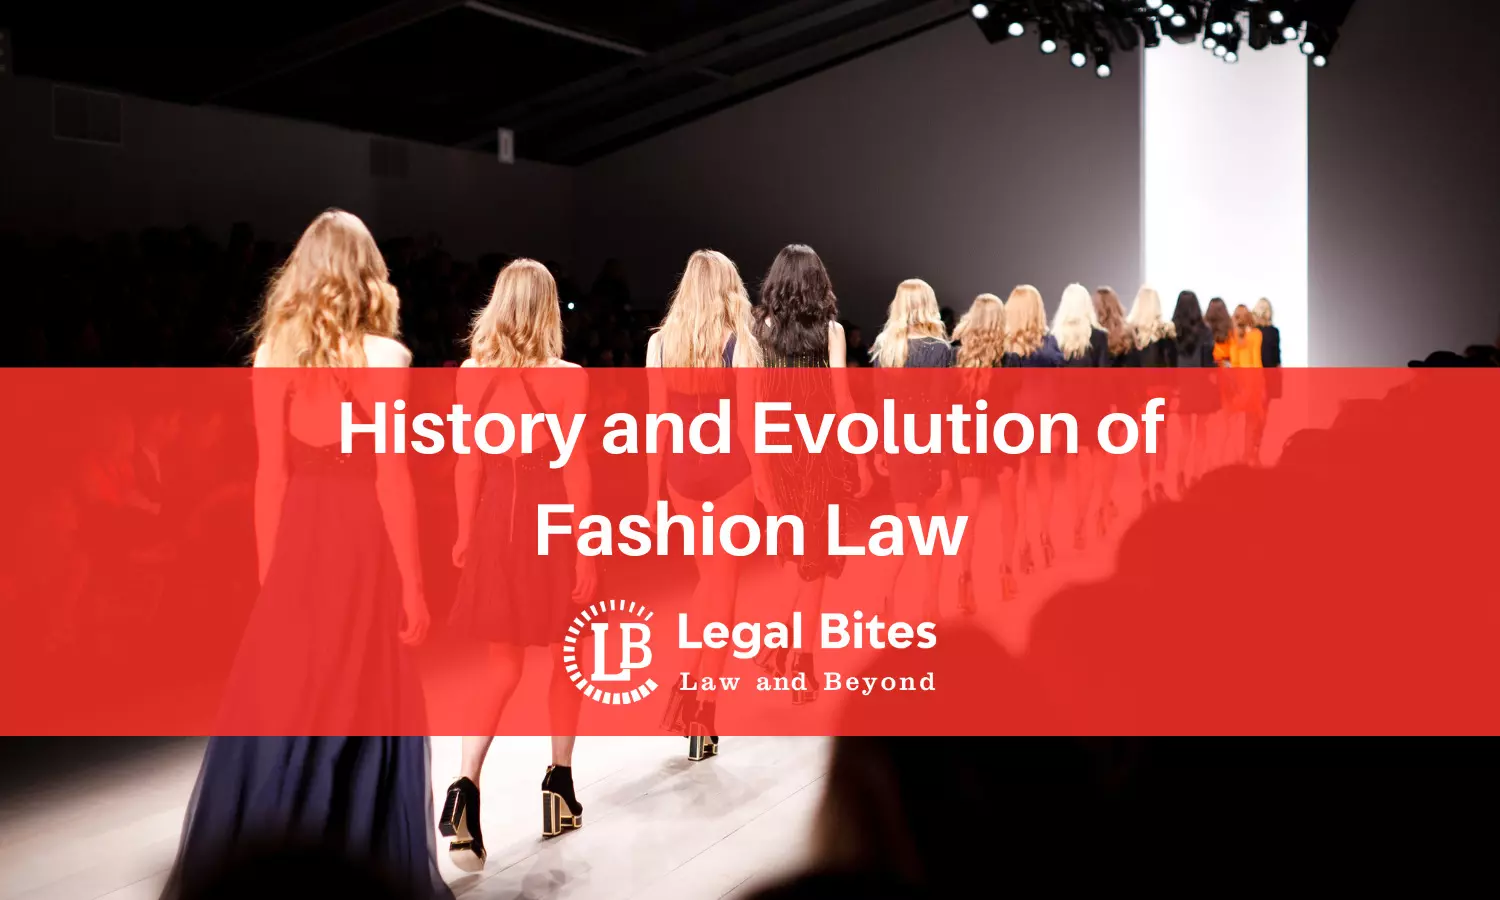 History and Evolution of Fashion Law